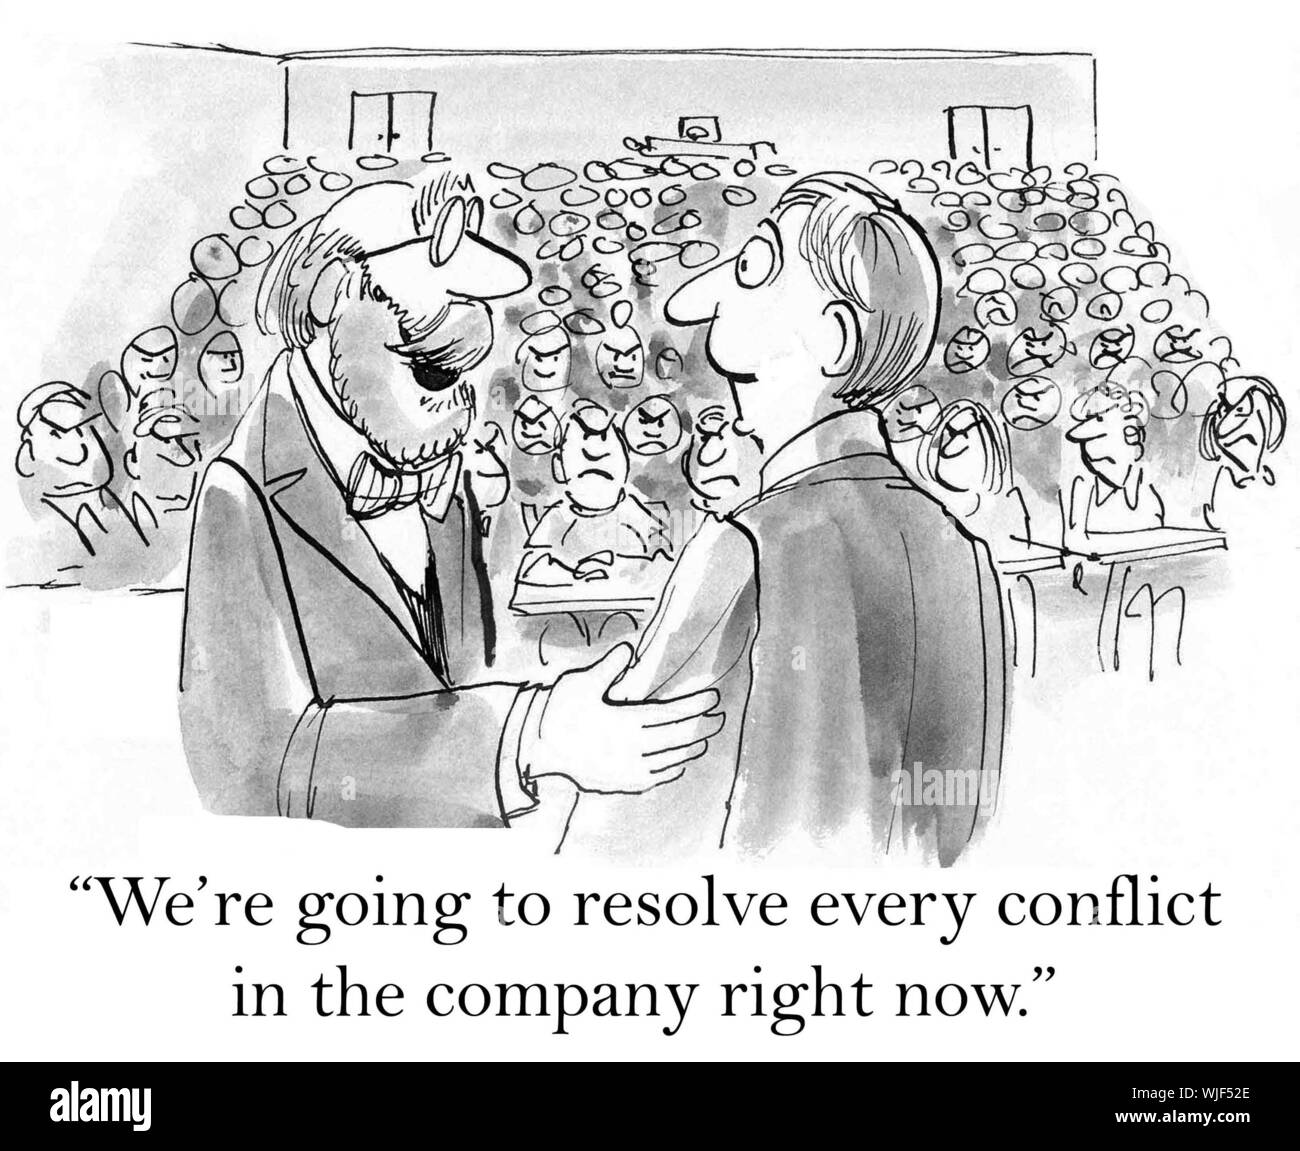 Conflict Cartoons Workplace